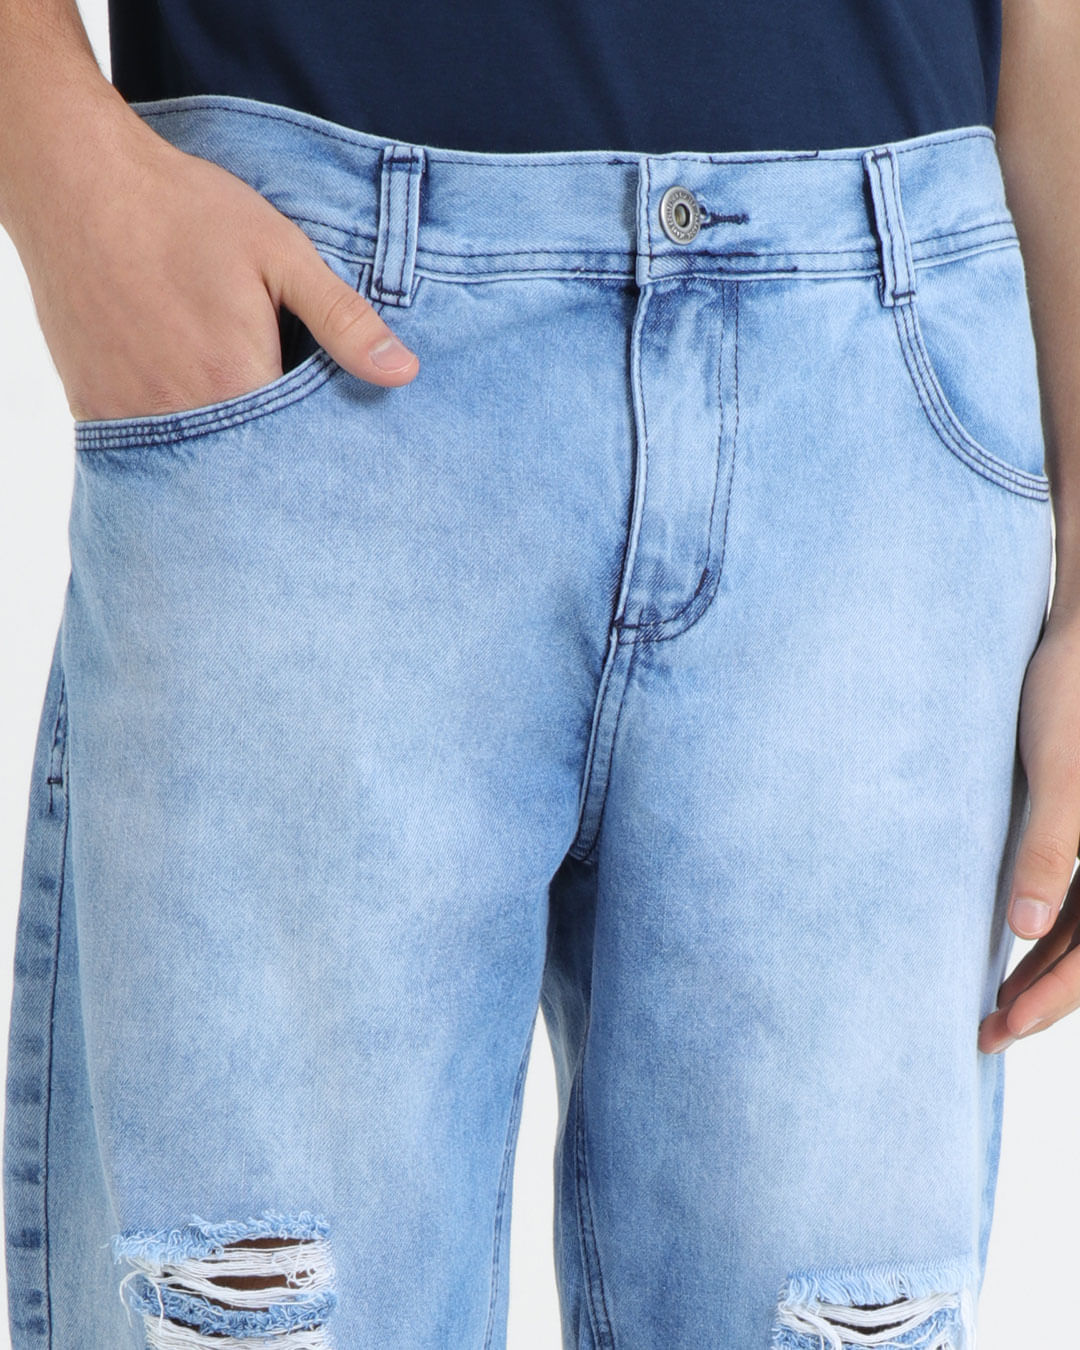 Bermuda-Jeans-Masculina-Destroyed-Paradox-Jeans-Azul